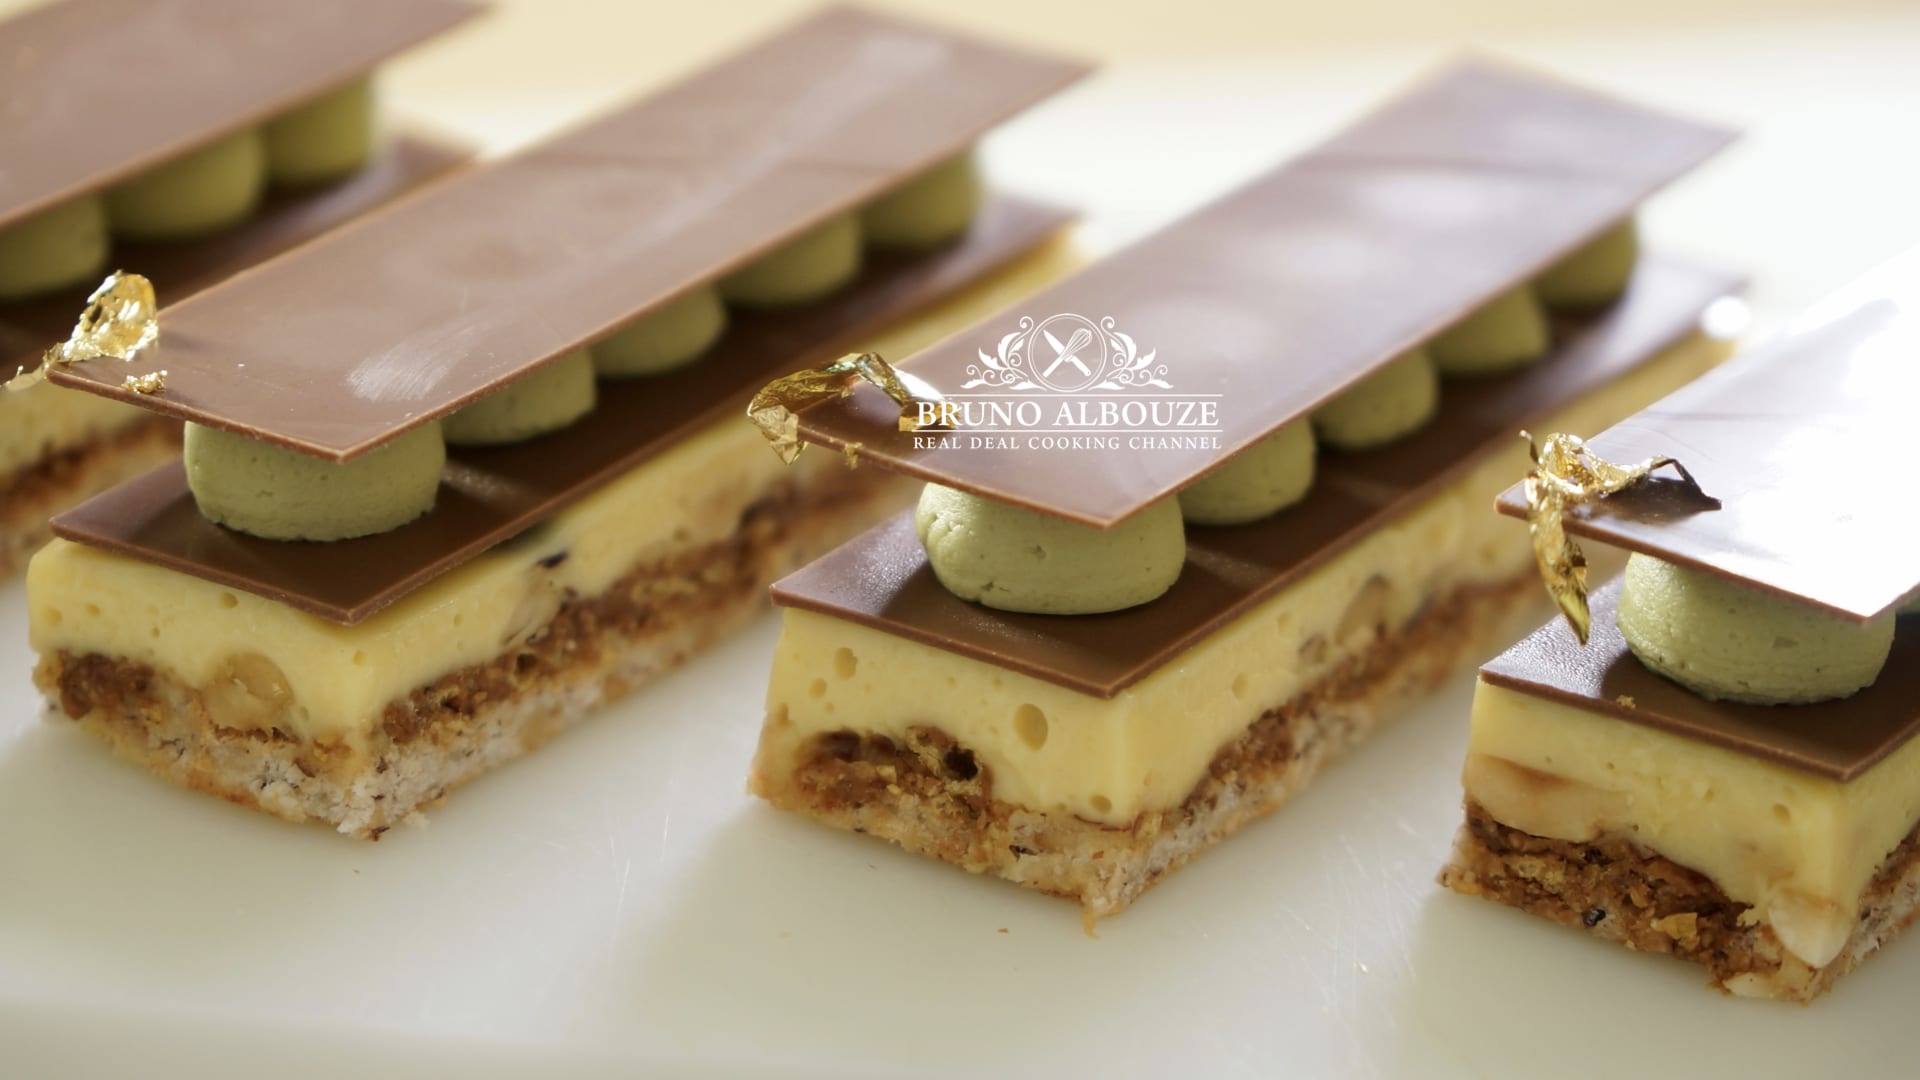 Bruno Albouze Chocolate Passion Mille Feuille